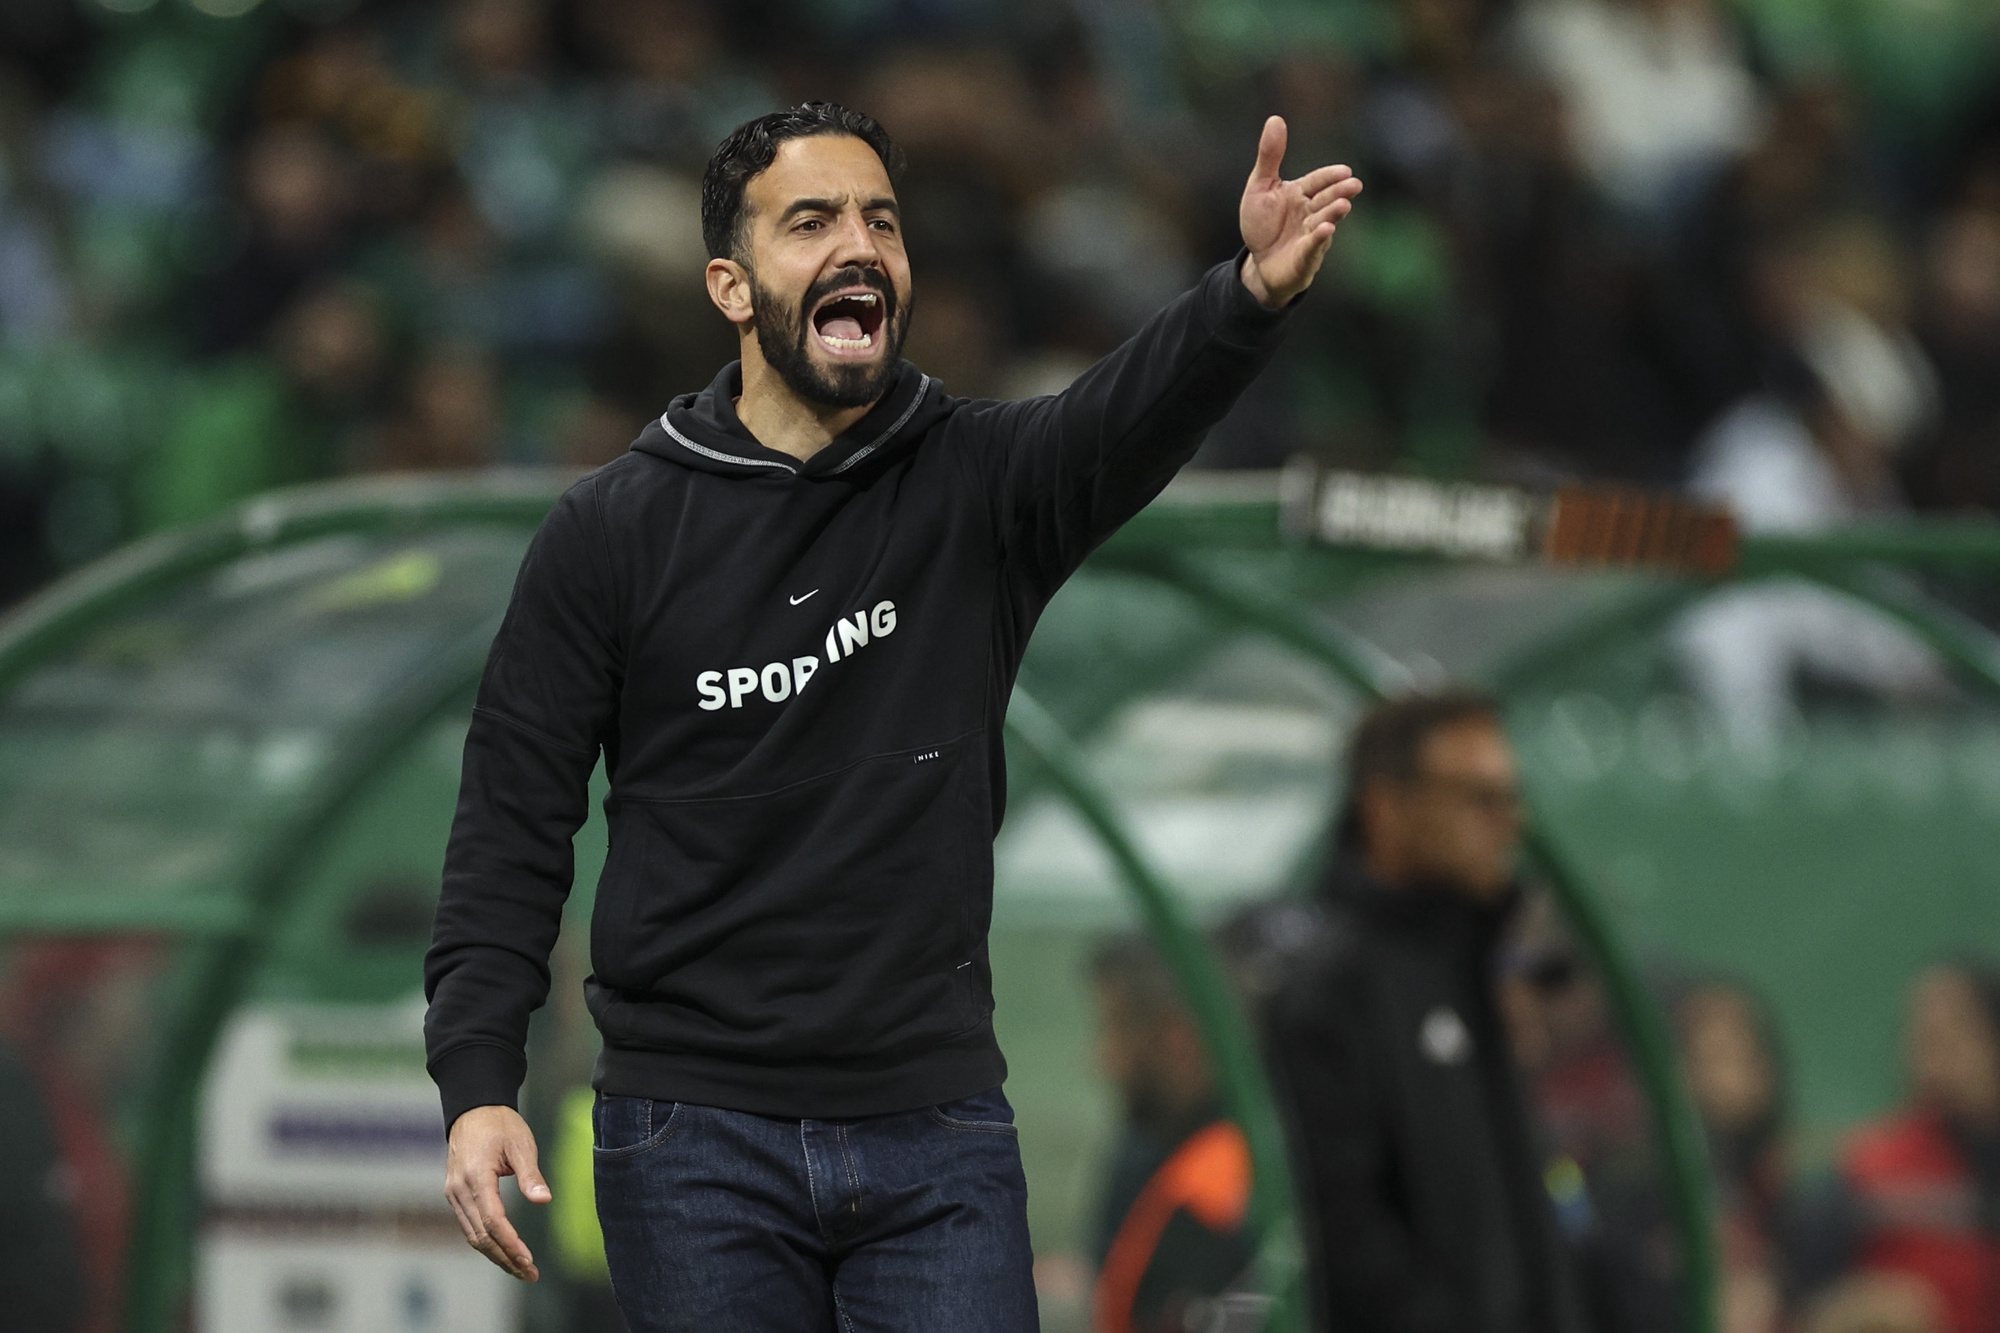 Sporting`s head coach Ruben Amorim during their UEFA Europa League soccer match with Midtjylland held at Alvalade stadium, Lisbon, Portugal, 16th February 2023. MIGUEL A. LOPES/LUSA